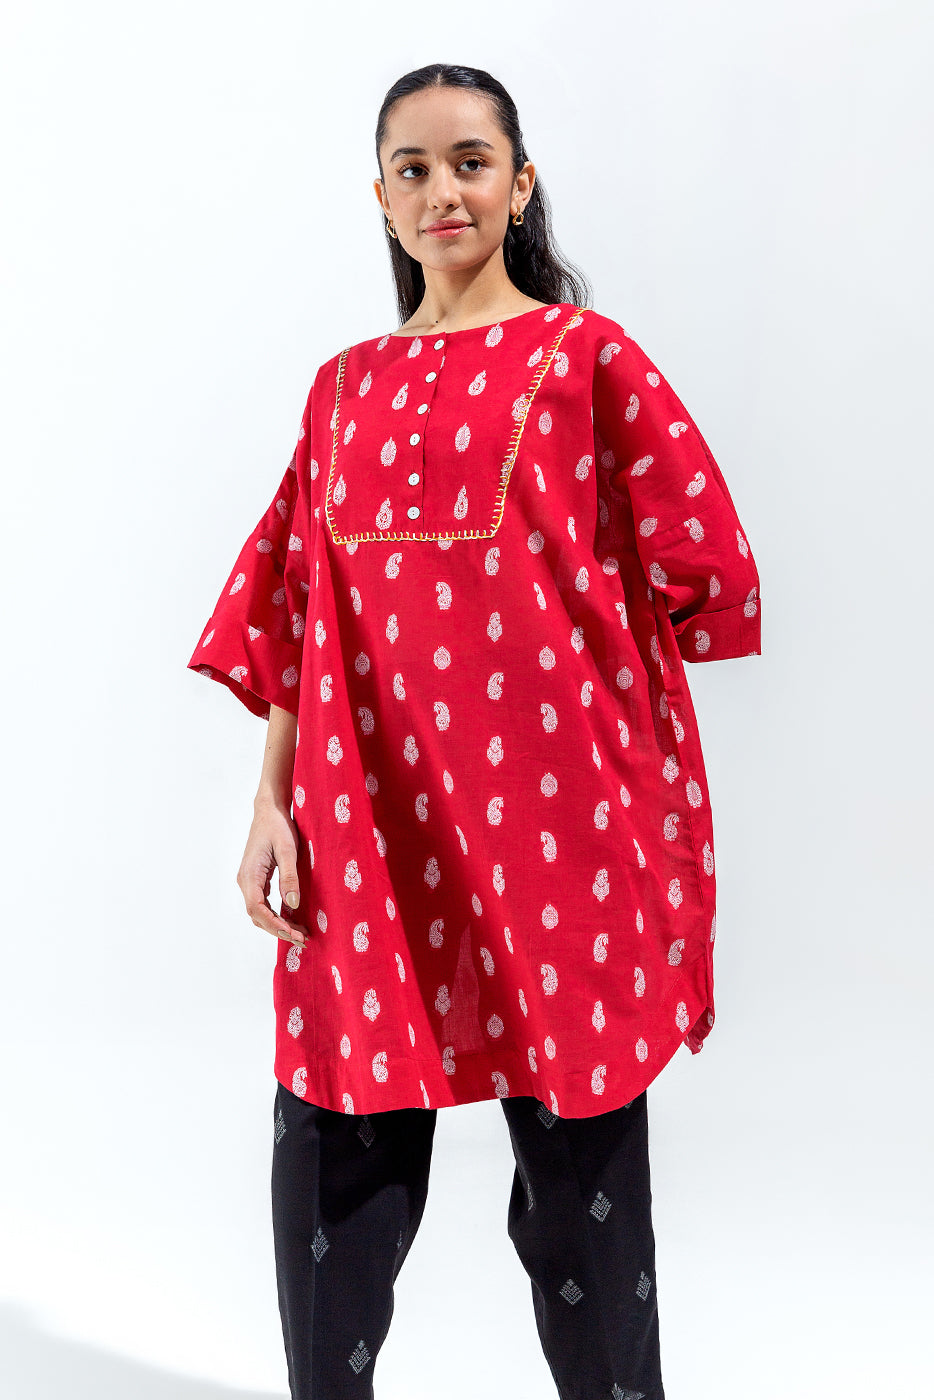 2 PIECE EMBROIDERED JACQUARD SUIT (PRET) - BEECHTREE